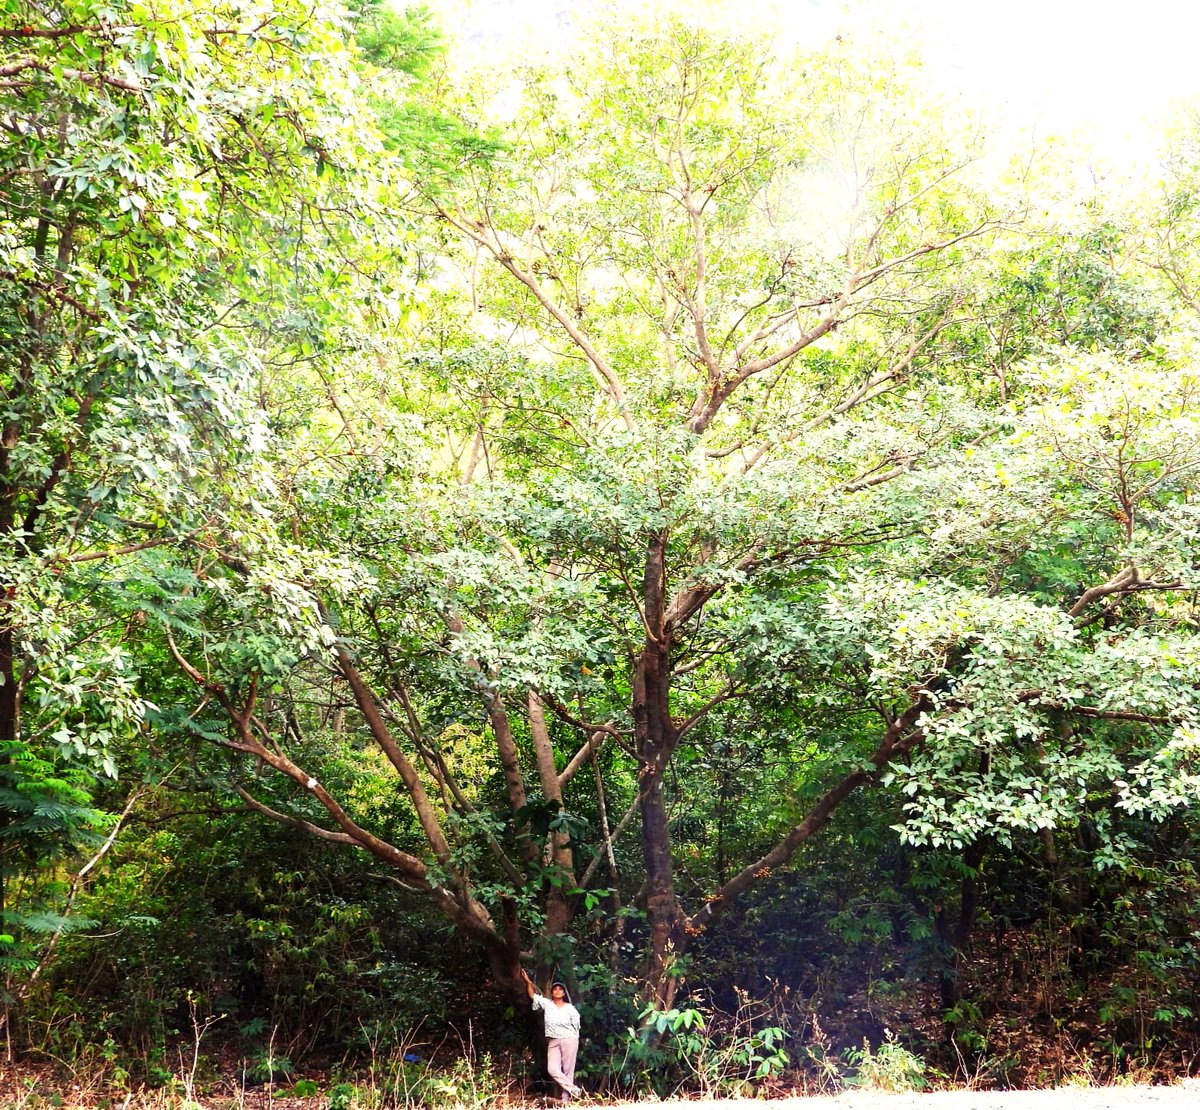 A huge Fig tree (Ficus recemosa) at Mulshi, Pune. Known as Umber in Marathi.
For more information -  forrest-ecology.org/2022/02/ficus-…
Entry from Neha Singh.
#TreeoftheYear #challenge #FORREST #Trees #TOTY2024 #indian #trees #forest #photography #nature #environemnt #conservation